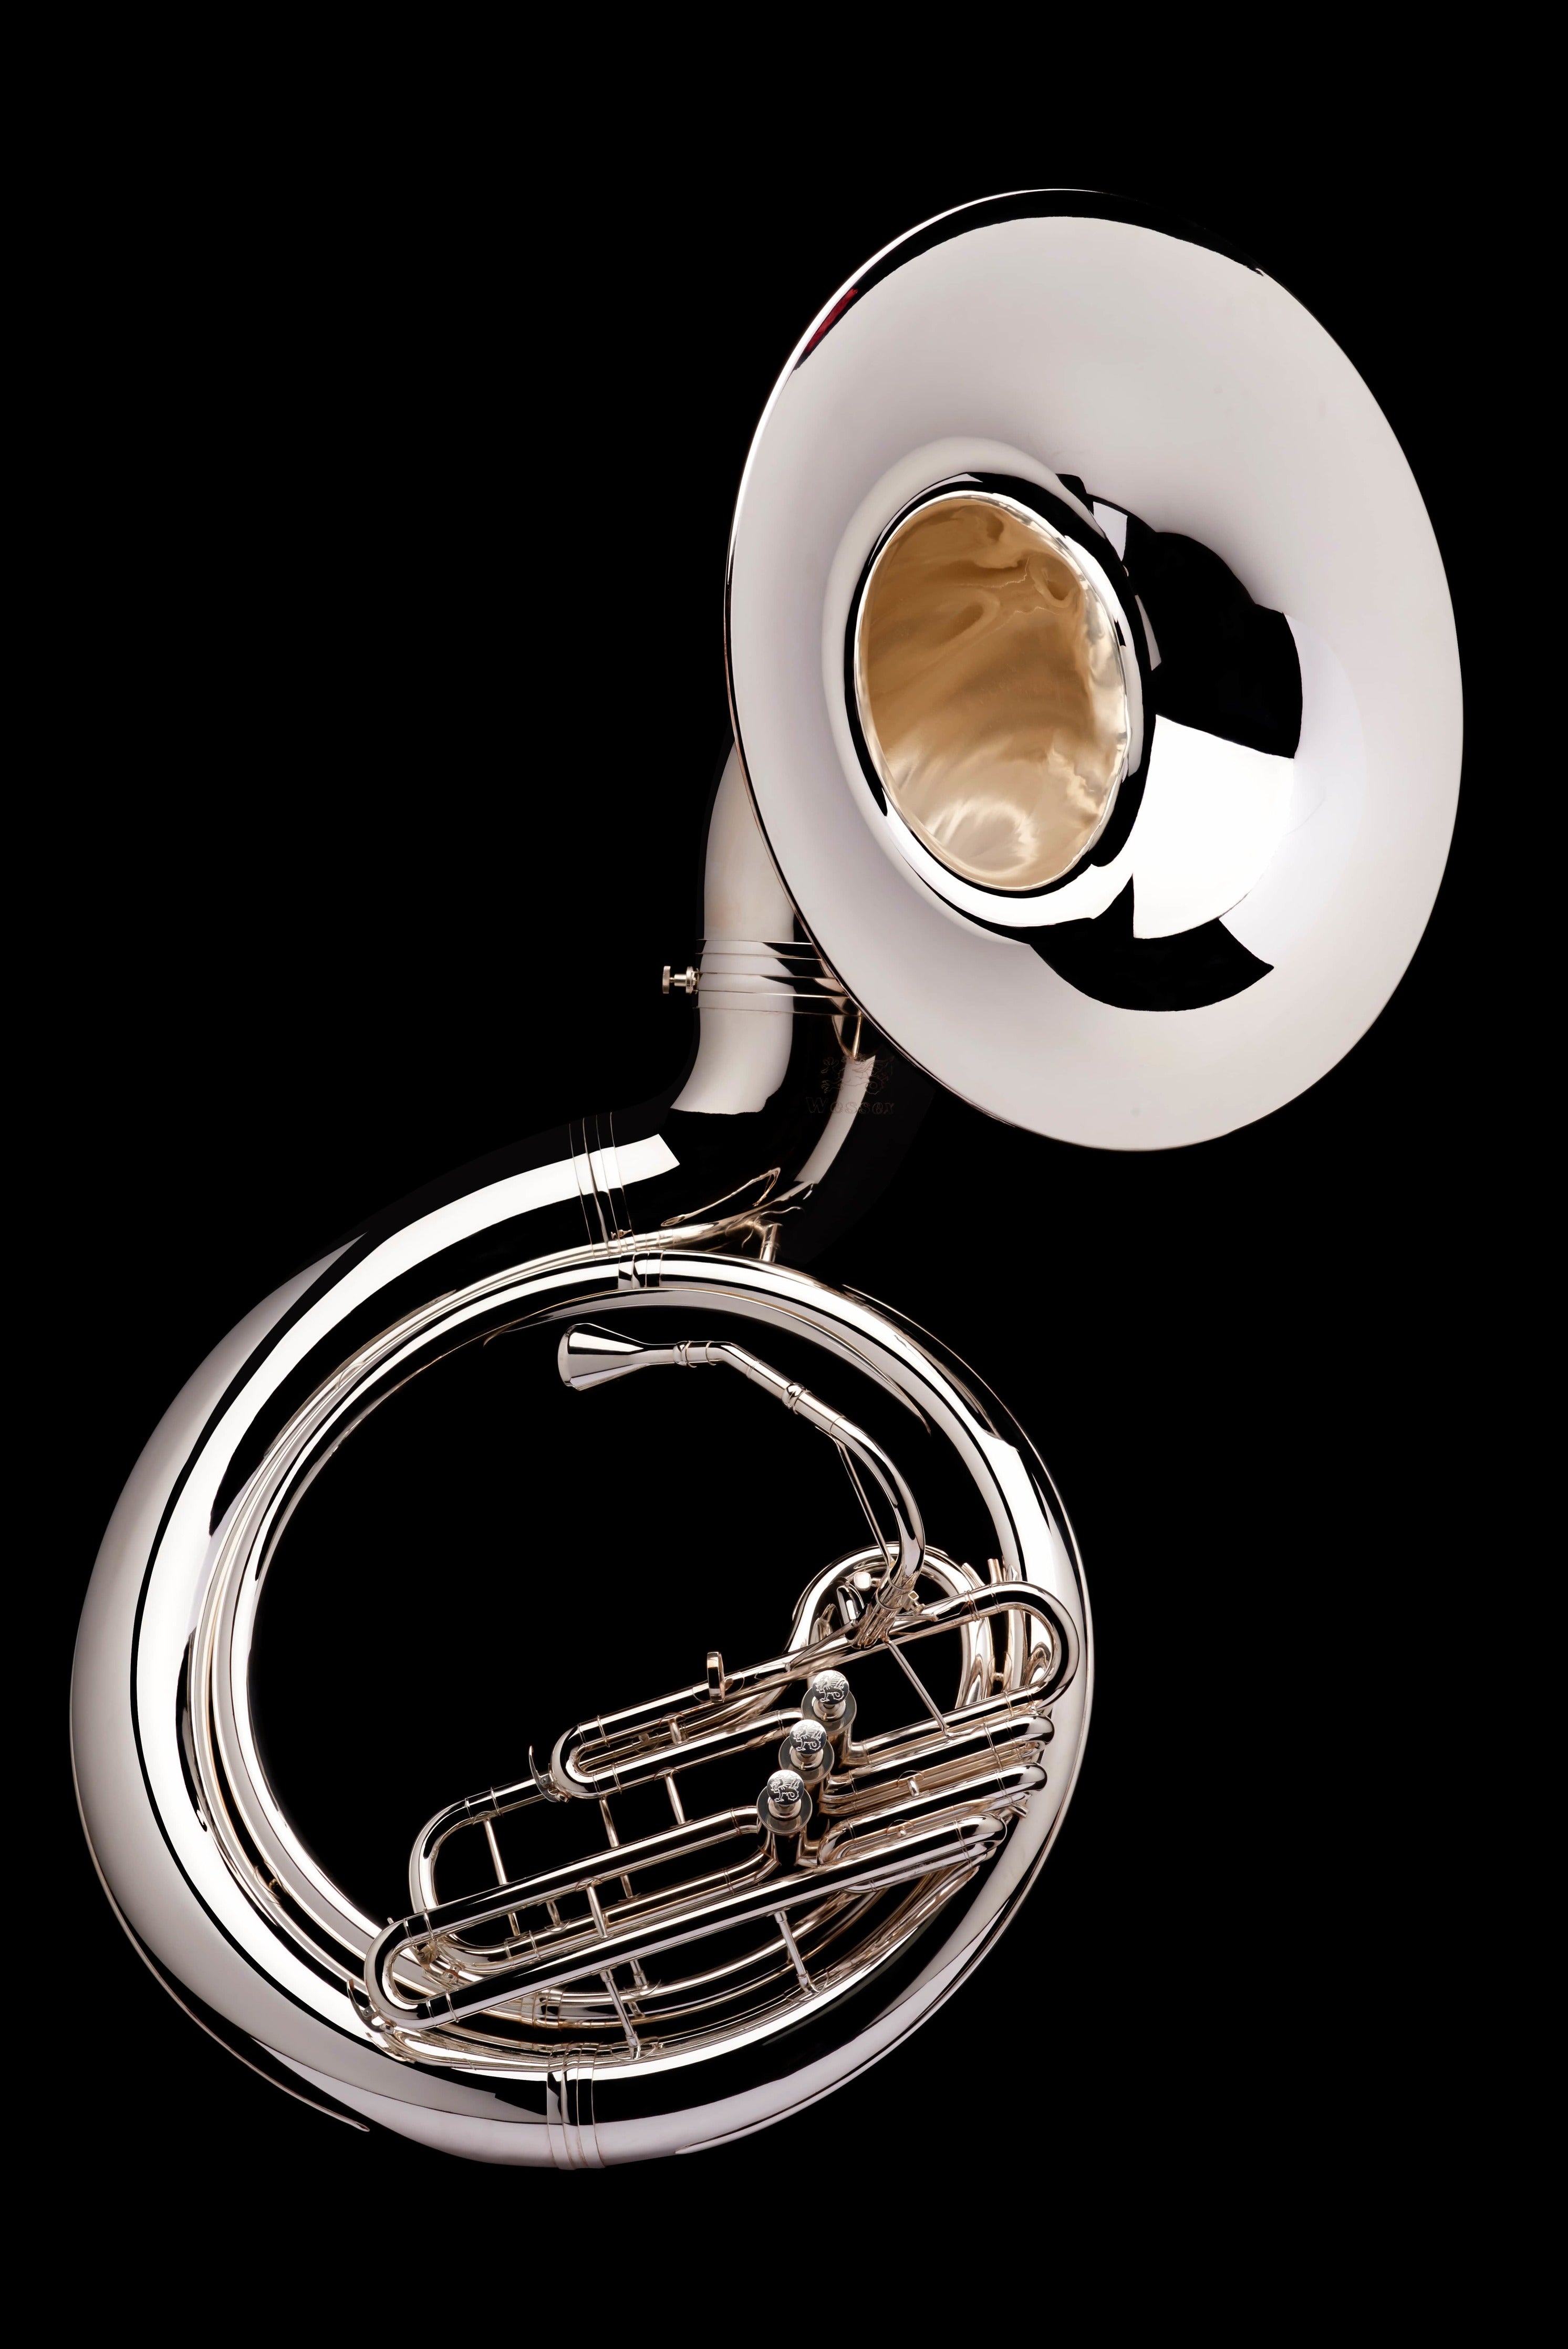 Sousaphone vs Tuba - What are the Similarities and Differences?